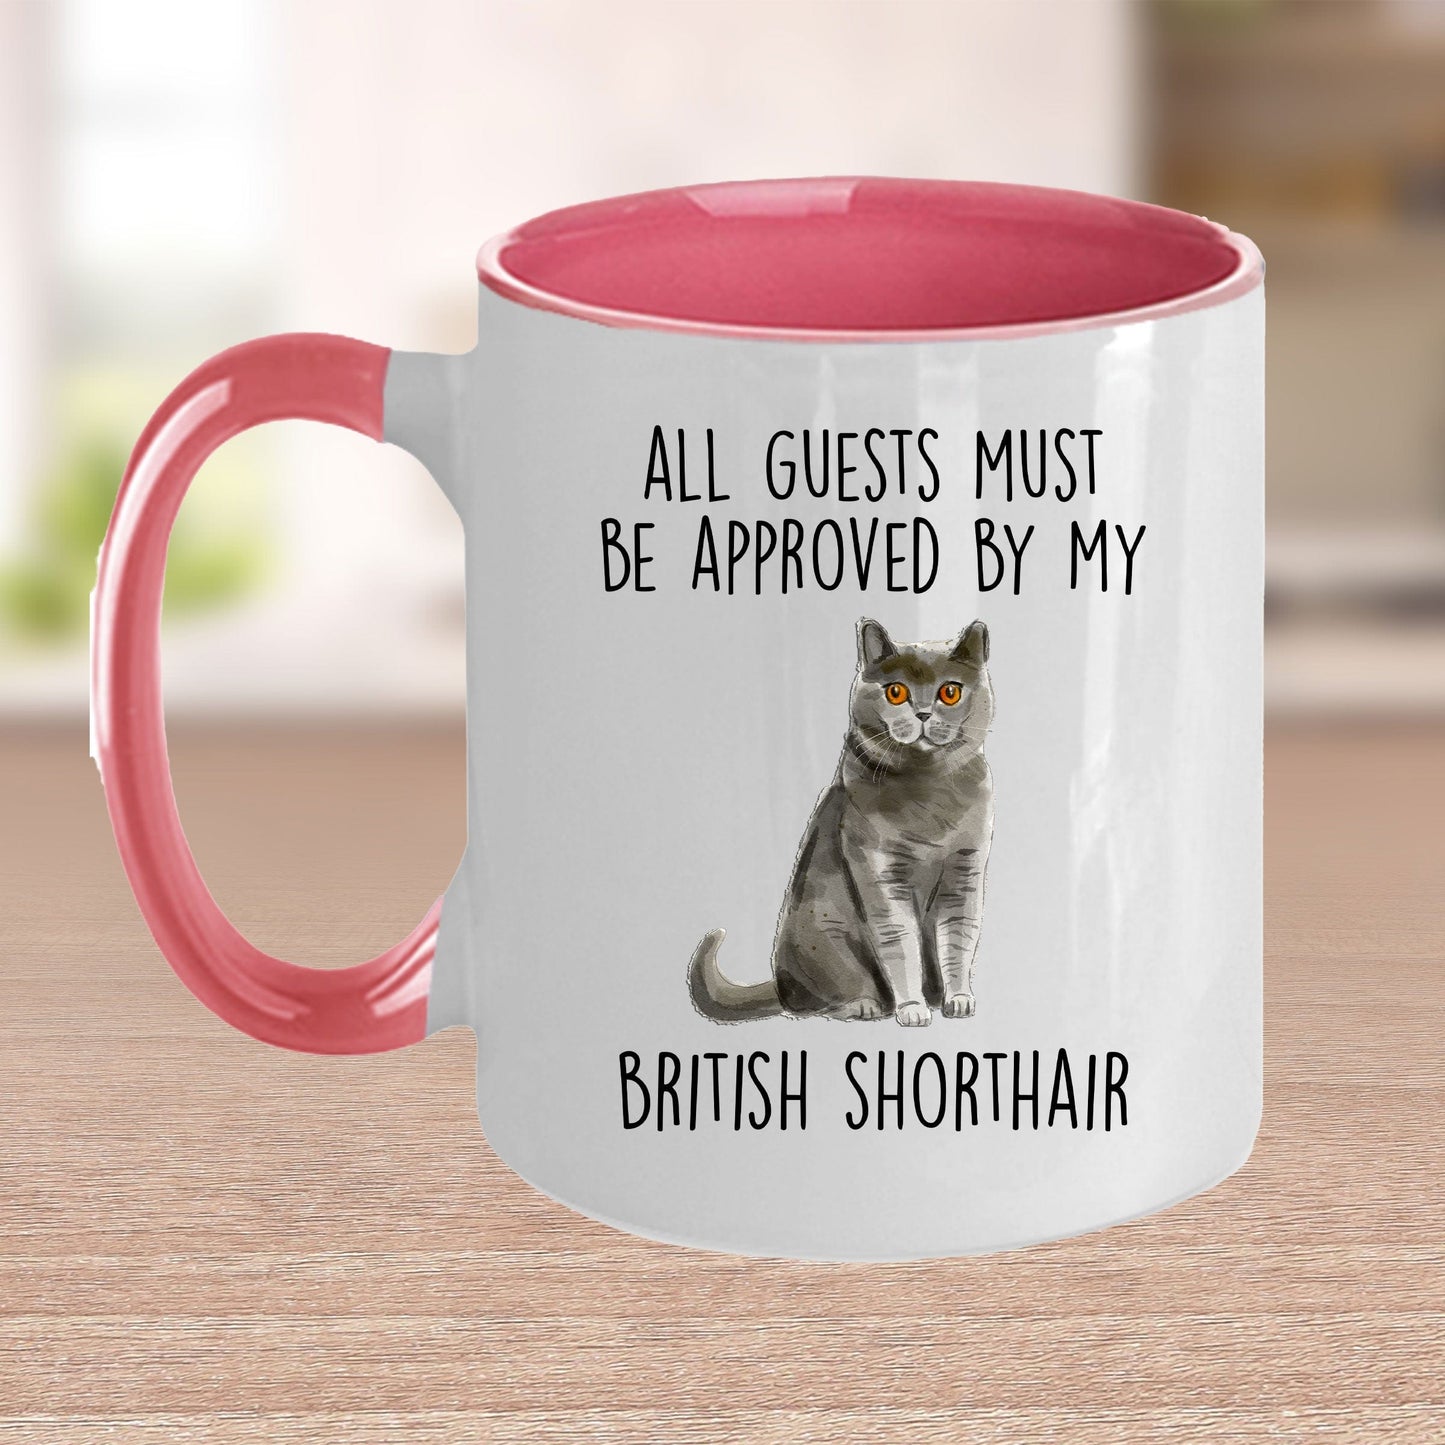 British Shorthair Cat Funny Ceramic Coffee Mug - All Guests Must Be Approved